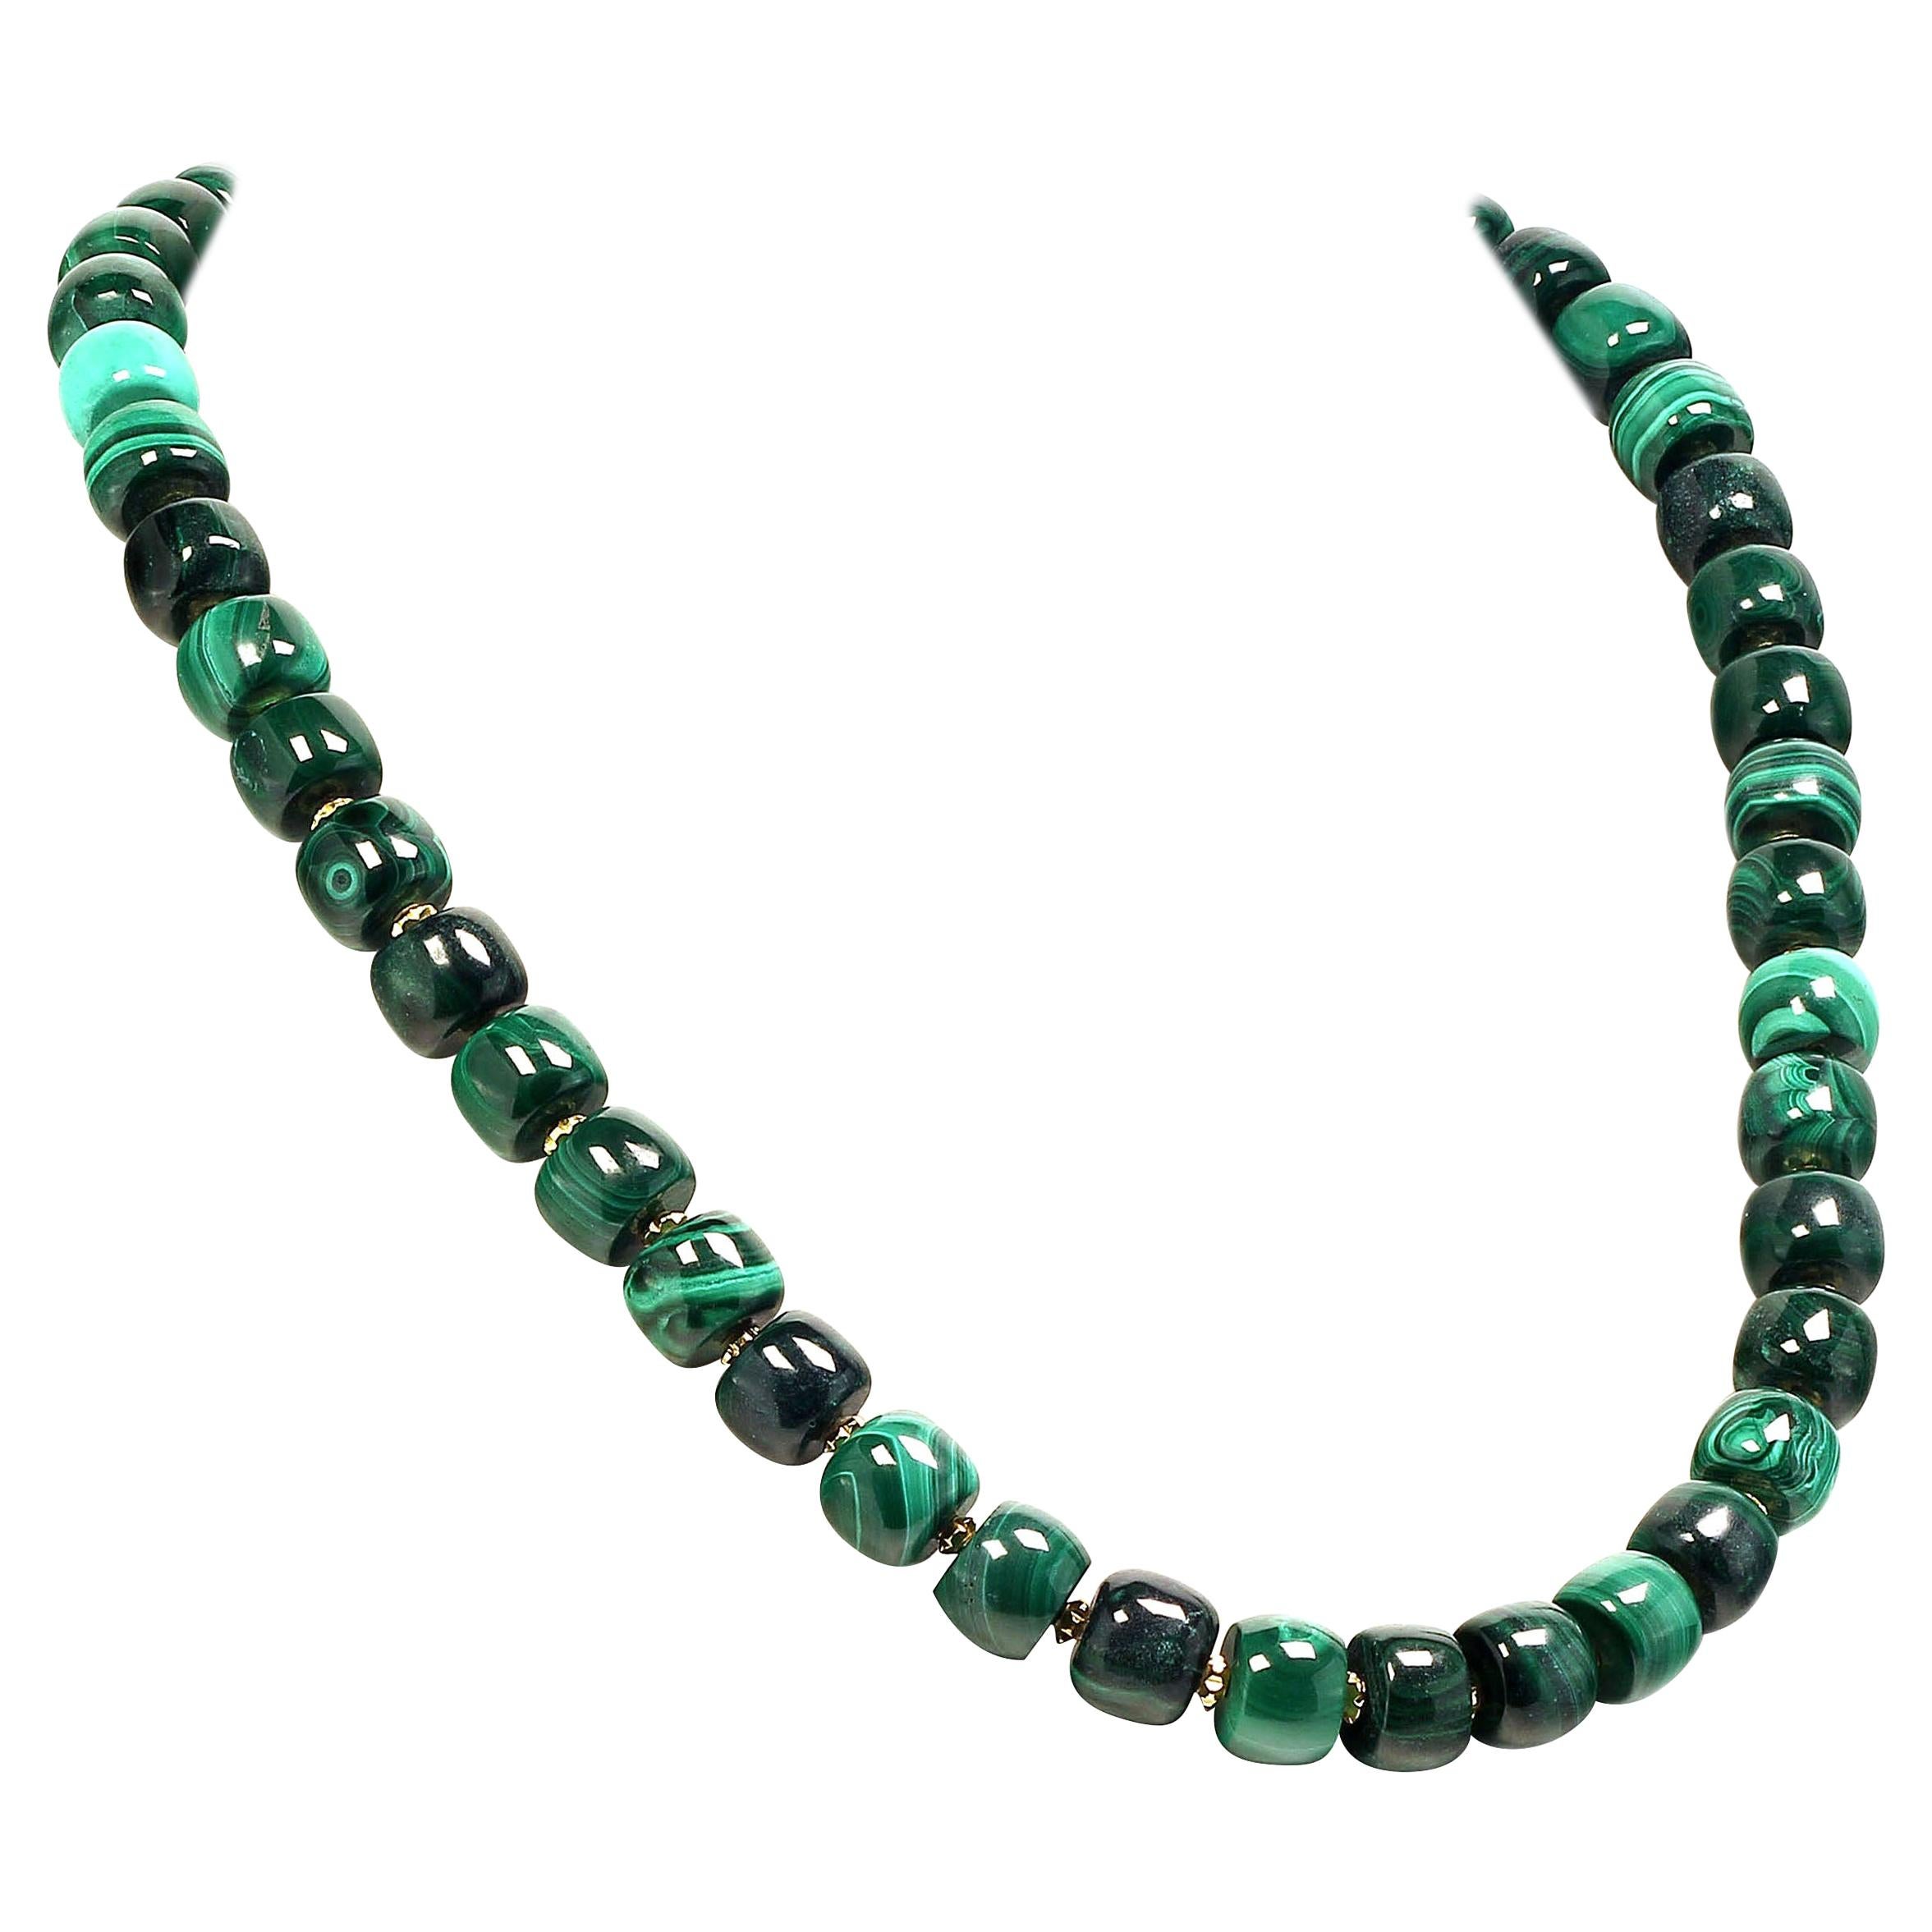 AJD 22 Inch Glowing Highly Polished Green Malachite Necklace